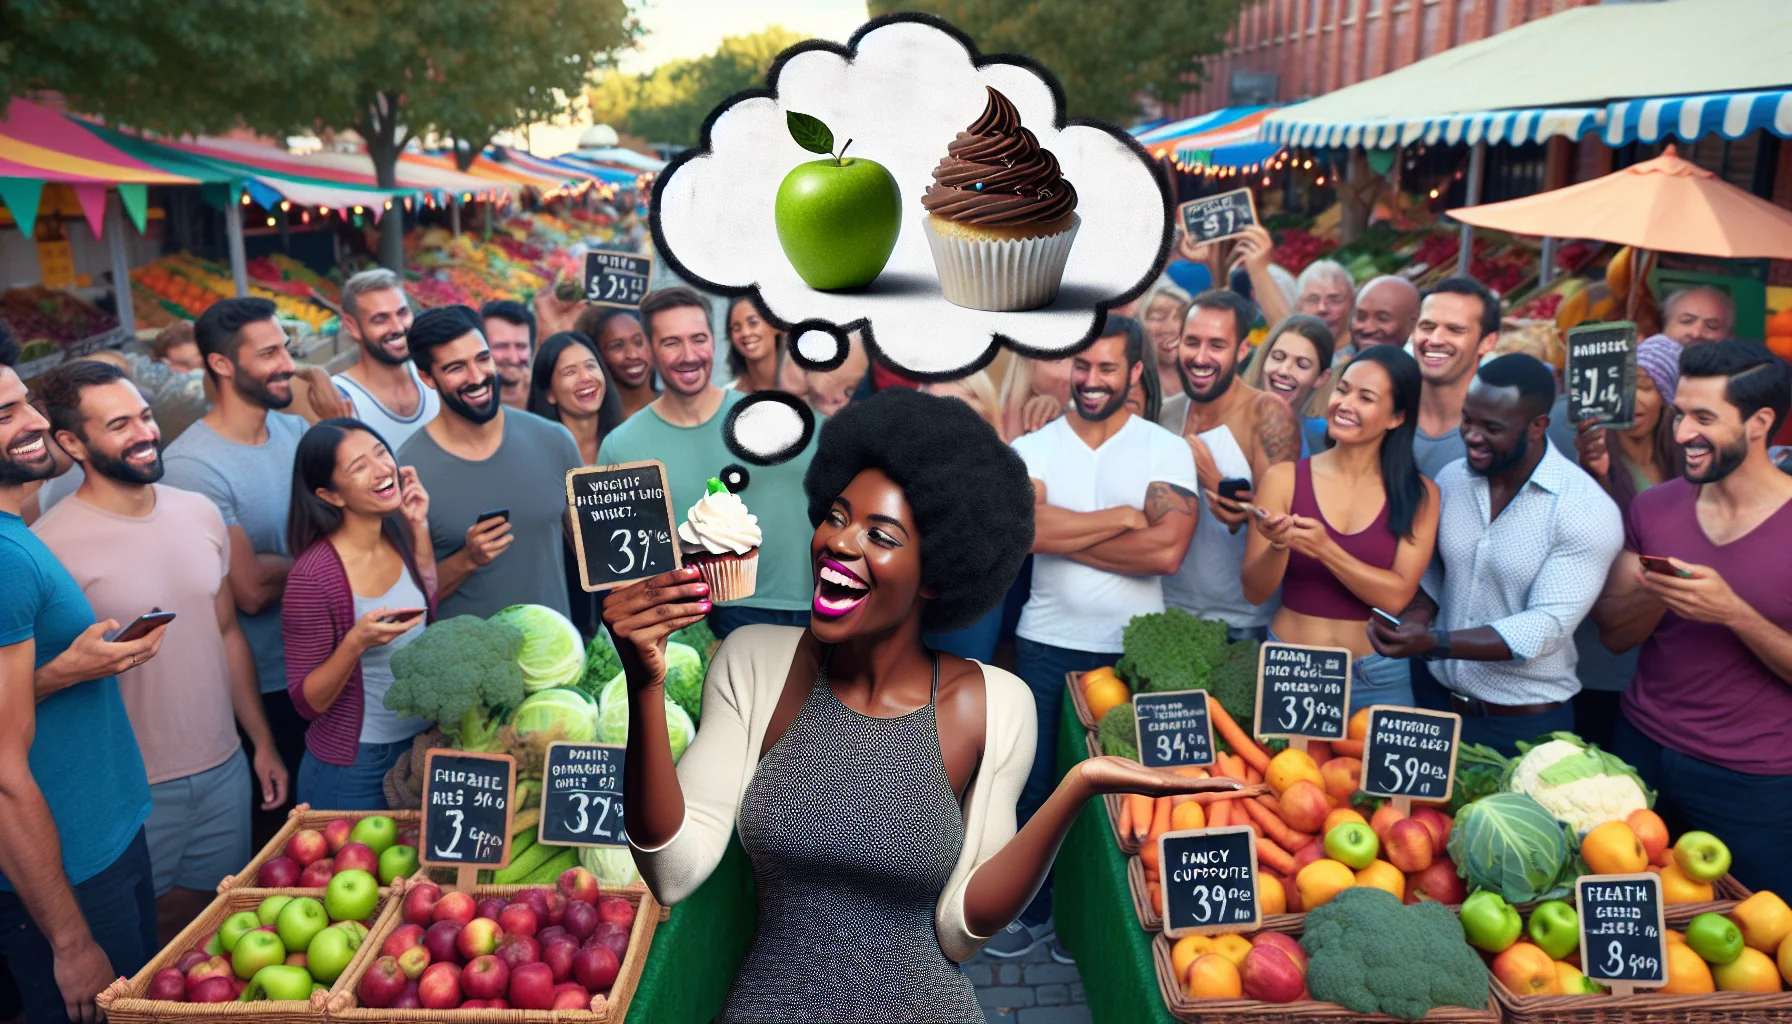 Generate a humorous and realistic image that illustrates the idea of 'Weekly Health and Fitness Insights'. Picture a vibrant, colorful farmers market packed with fresh fruits and vegetables. A cheerful Black woman, a fitness coach, is holding up a green apple in one hand and a fancy, expensive cupcake in the other, comparing the prices. She has a thought bubble over her head, filled with an image of the fruit growing larger and the cupcake shrinking as their price tickets swap places, suggesting the affordability of healthier food options. The surrounding crowd of diverse men and women are laughing, intrigued by her presentation.